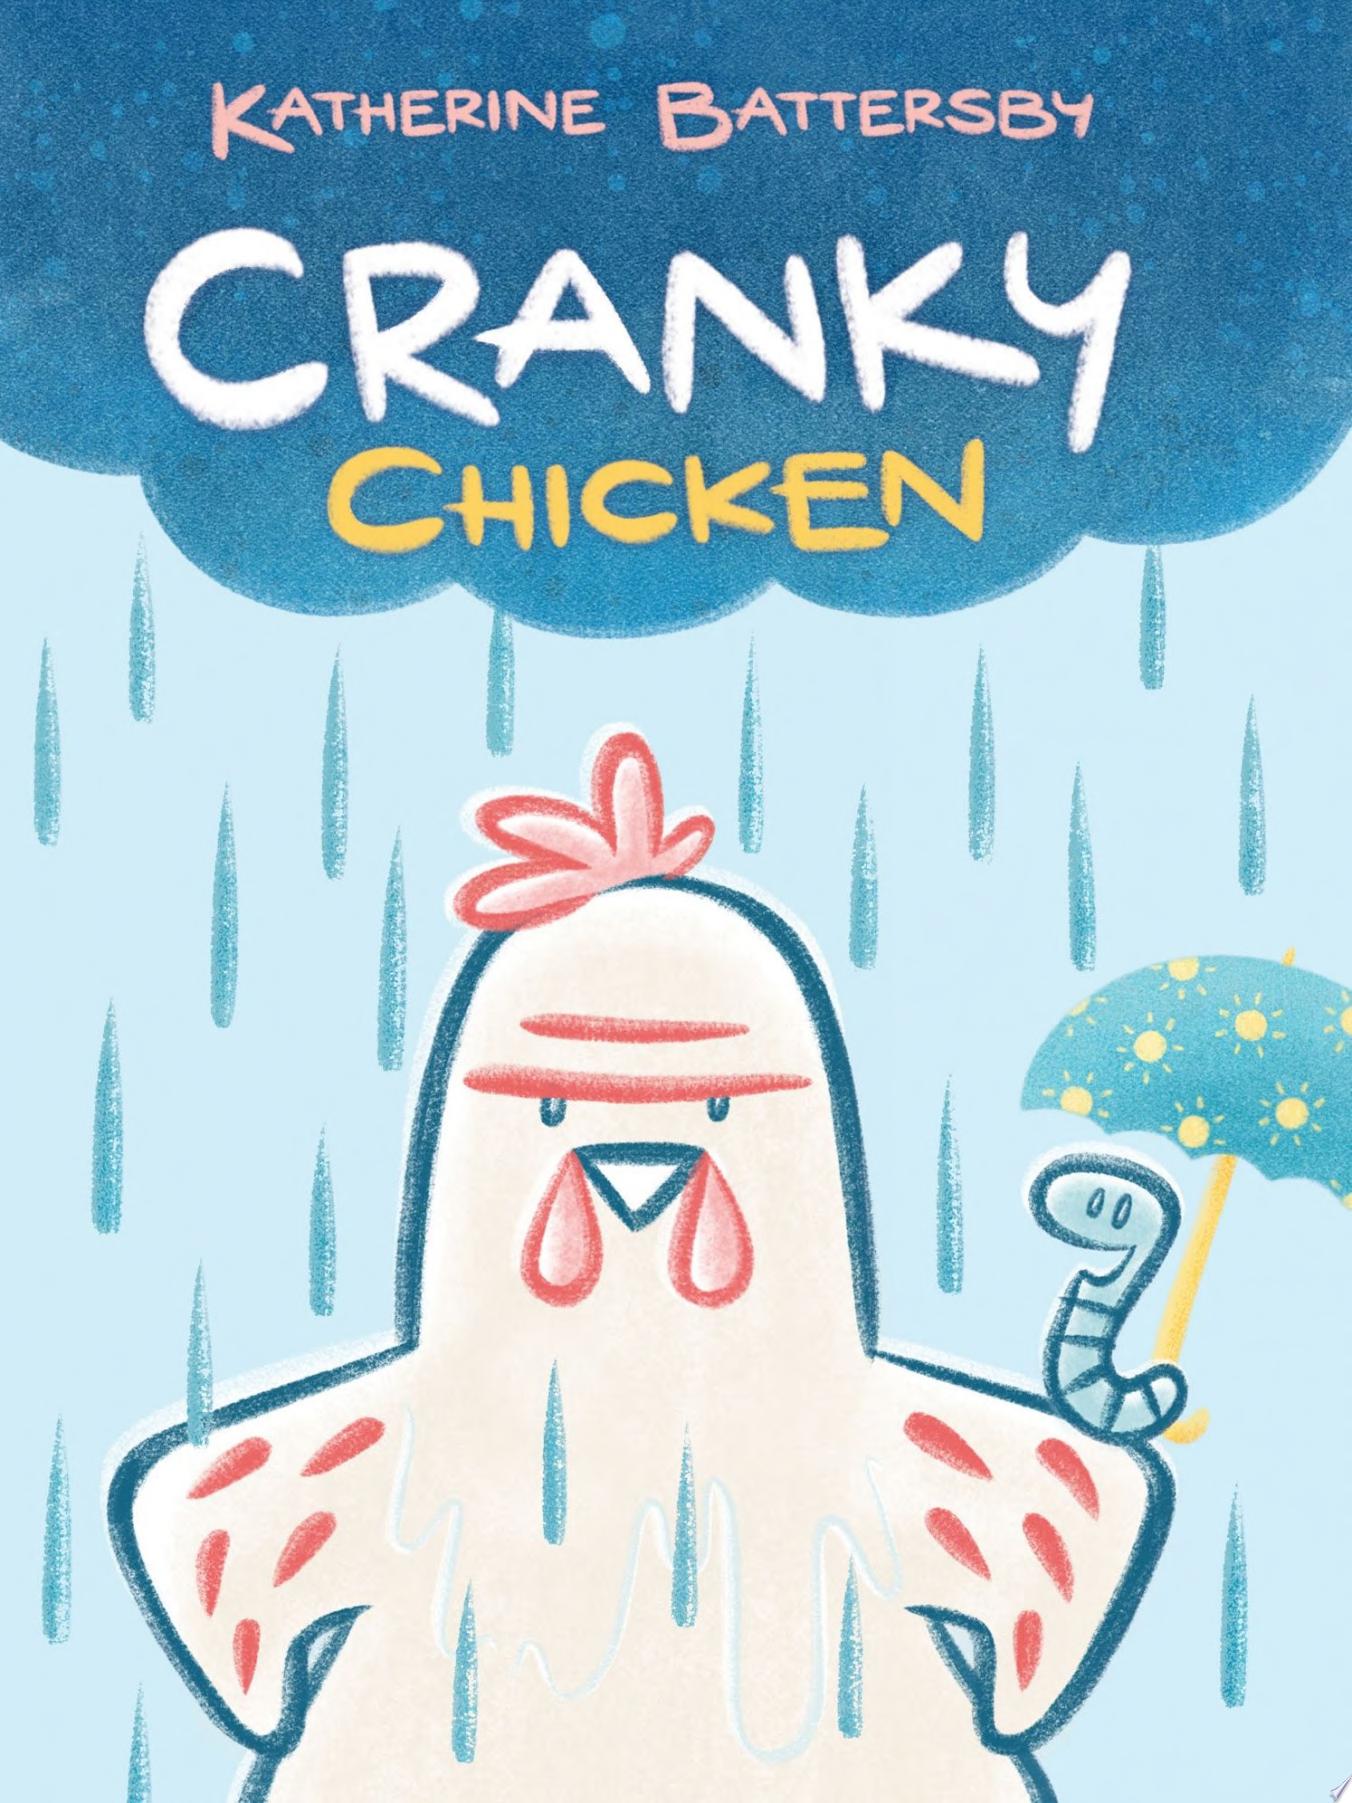 Image for "Cranky Chicken"